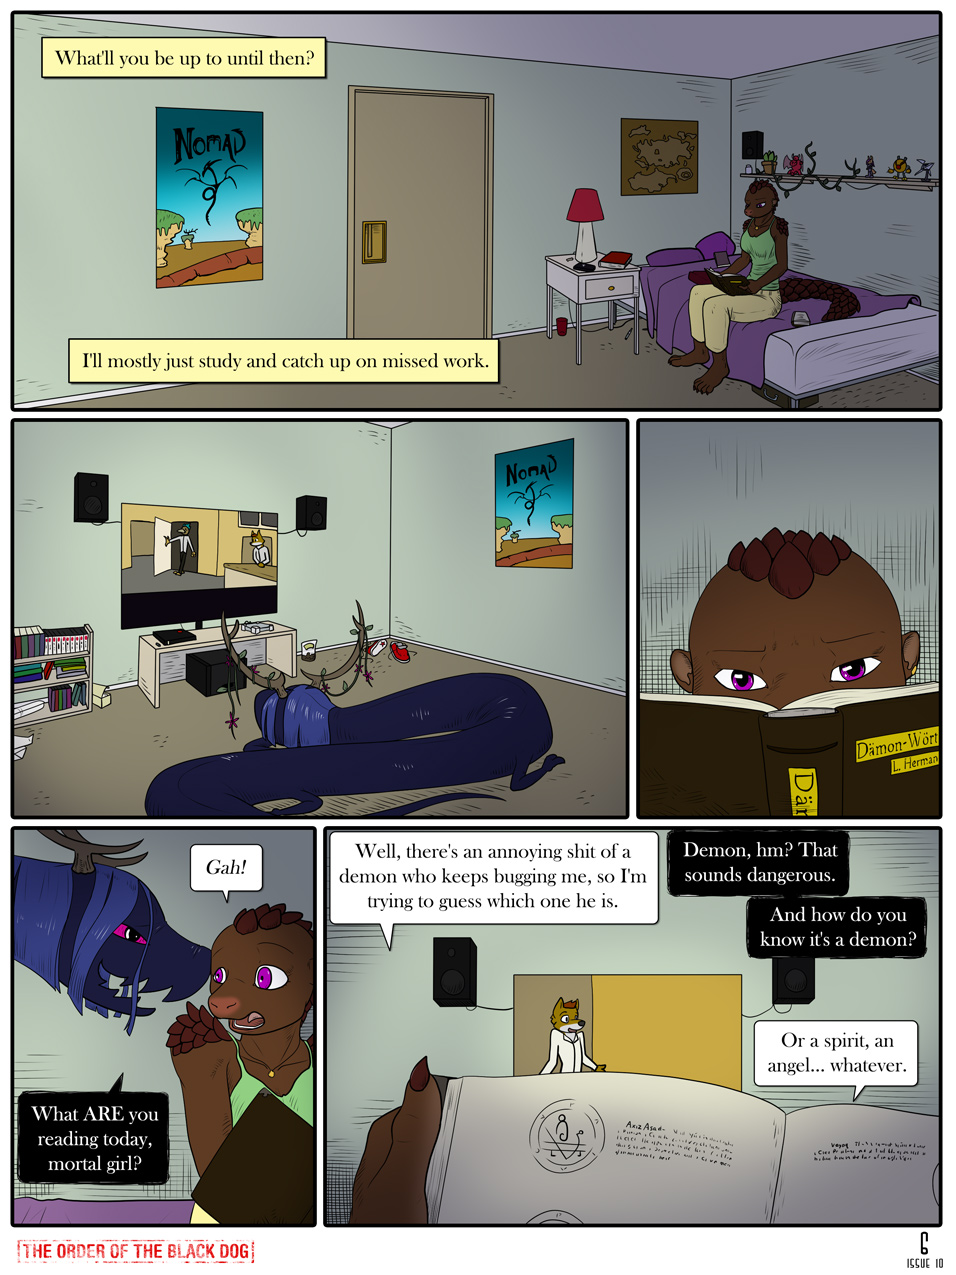 Issue 10, Page 6